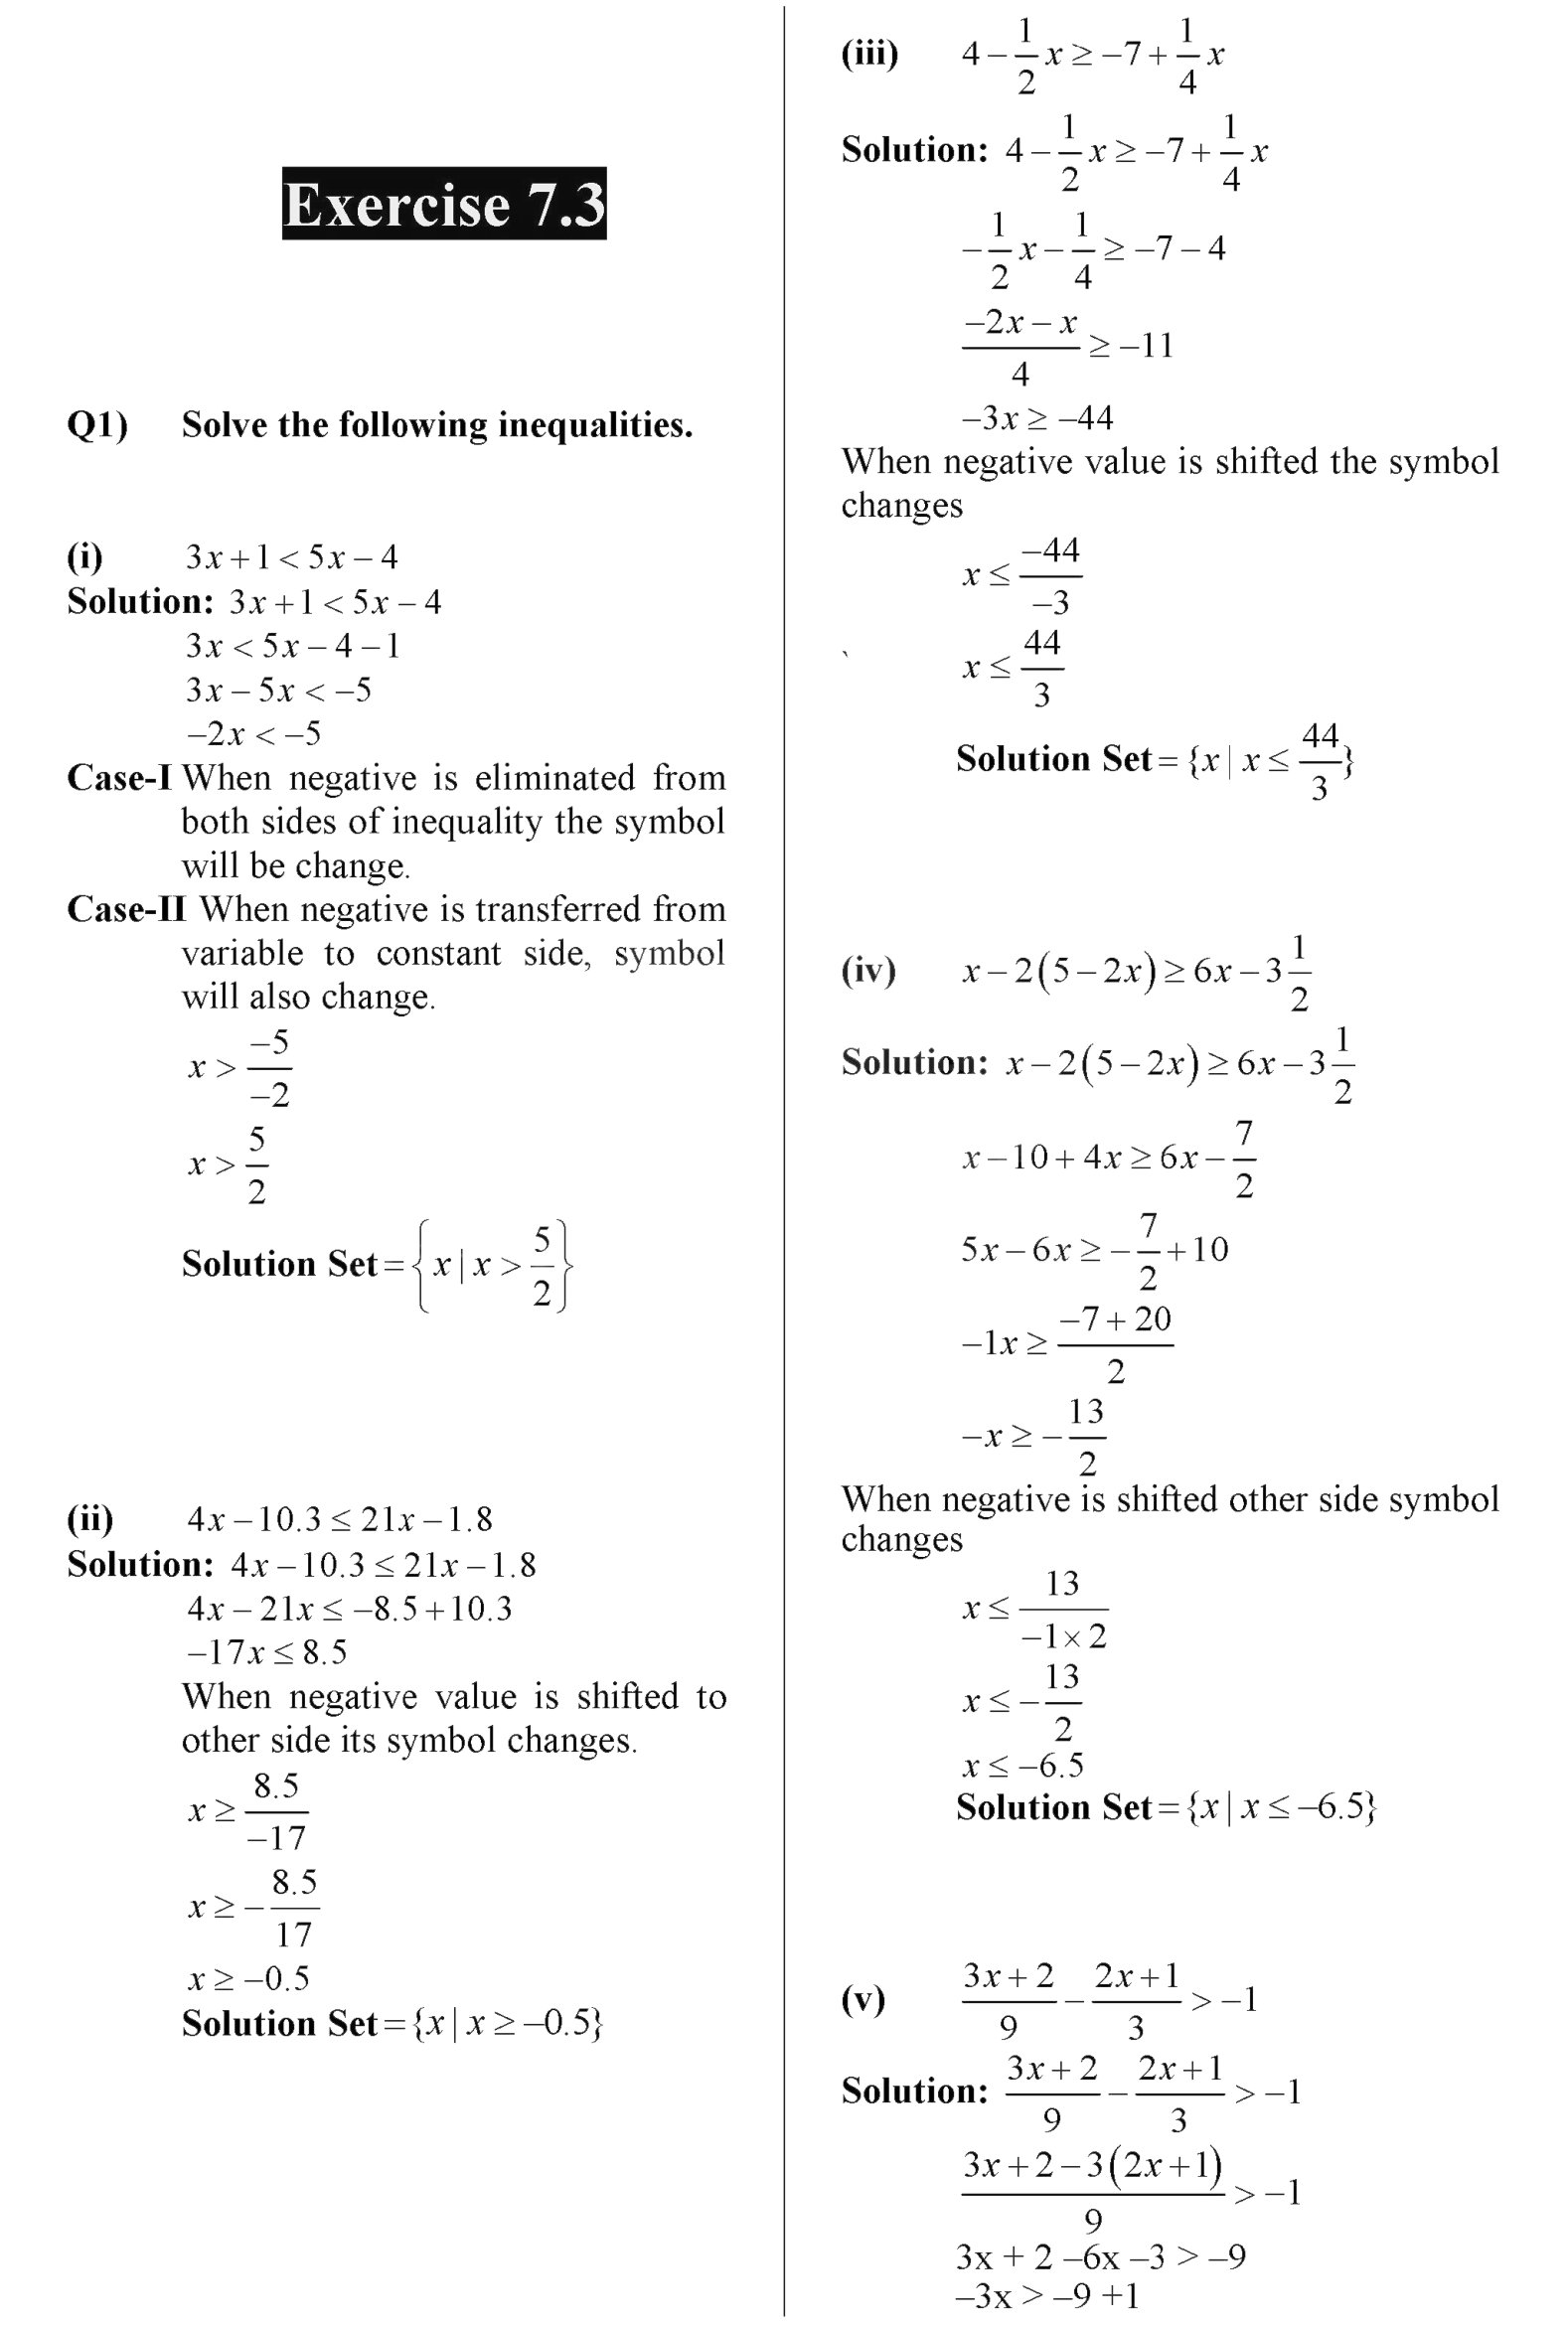 9th class Math solved Notes Chapter Name: Linear Equations and Inequalities {Exercise 7.3}